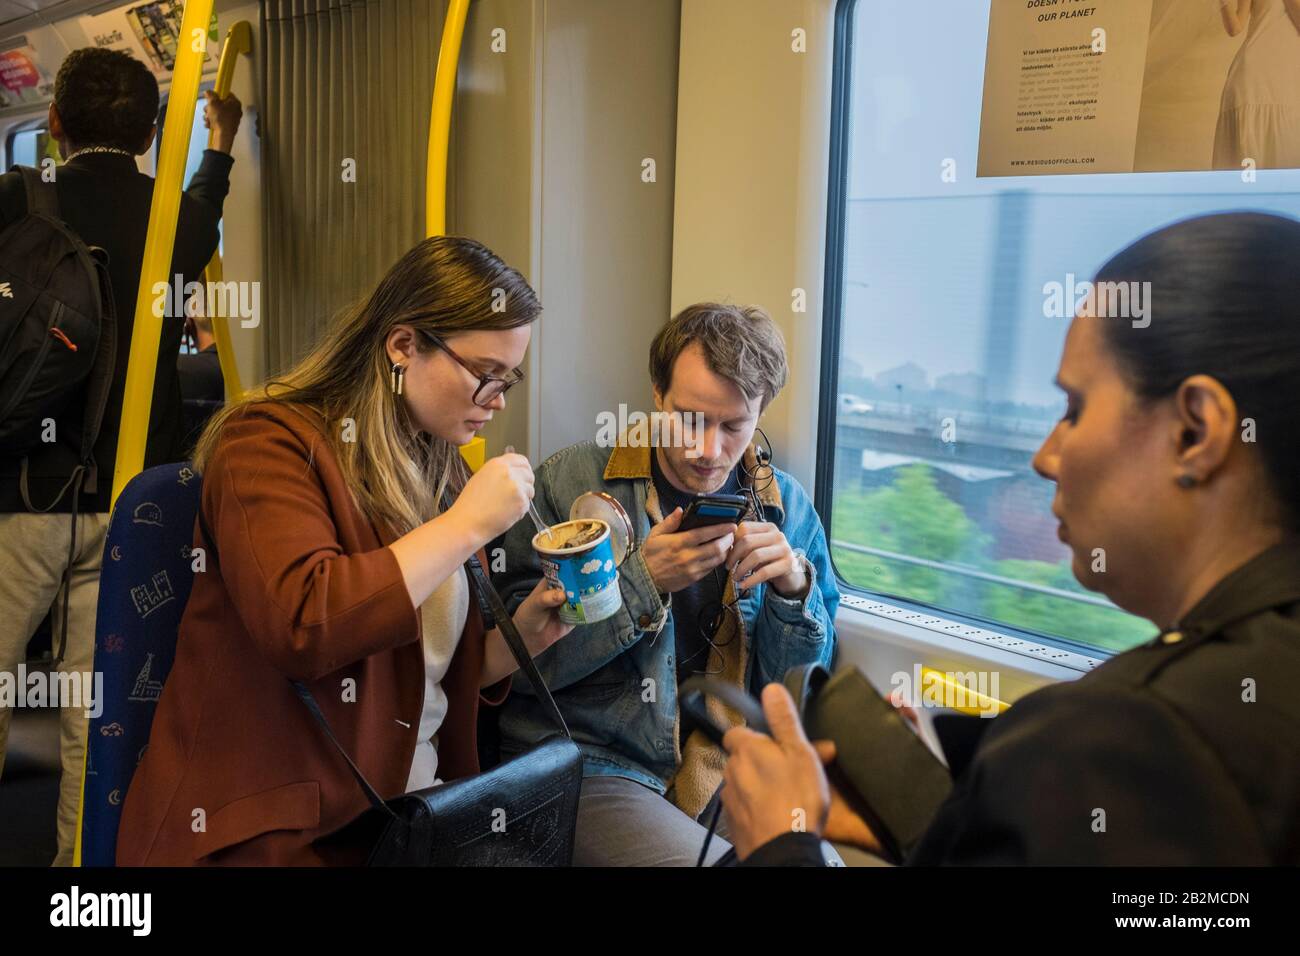 2 persons snacking on a Stockholm tube train Stock Photo